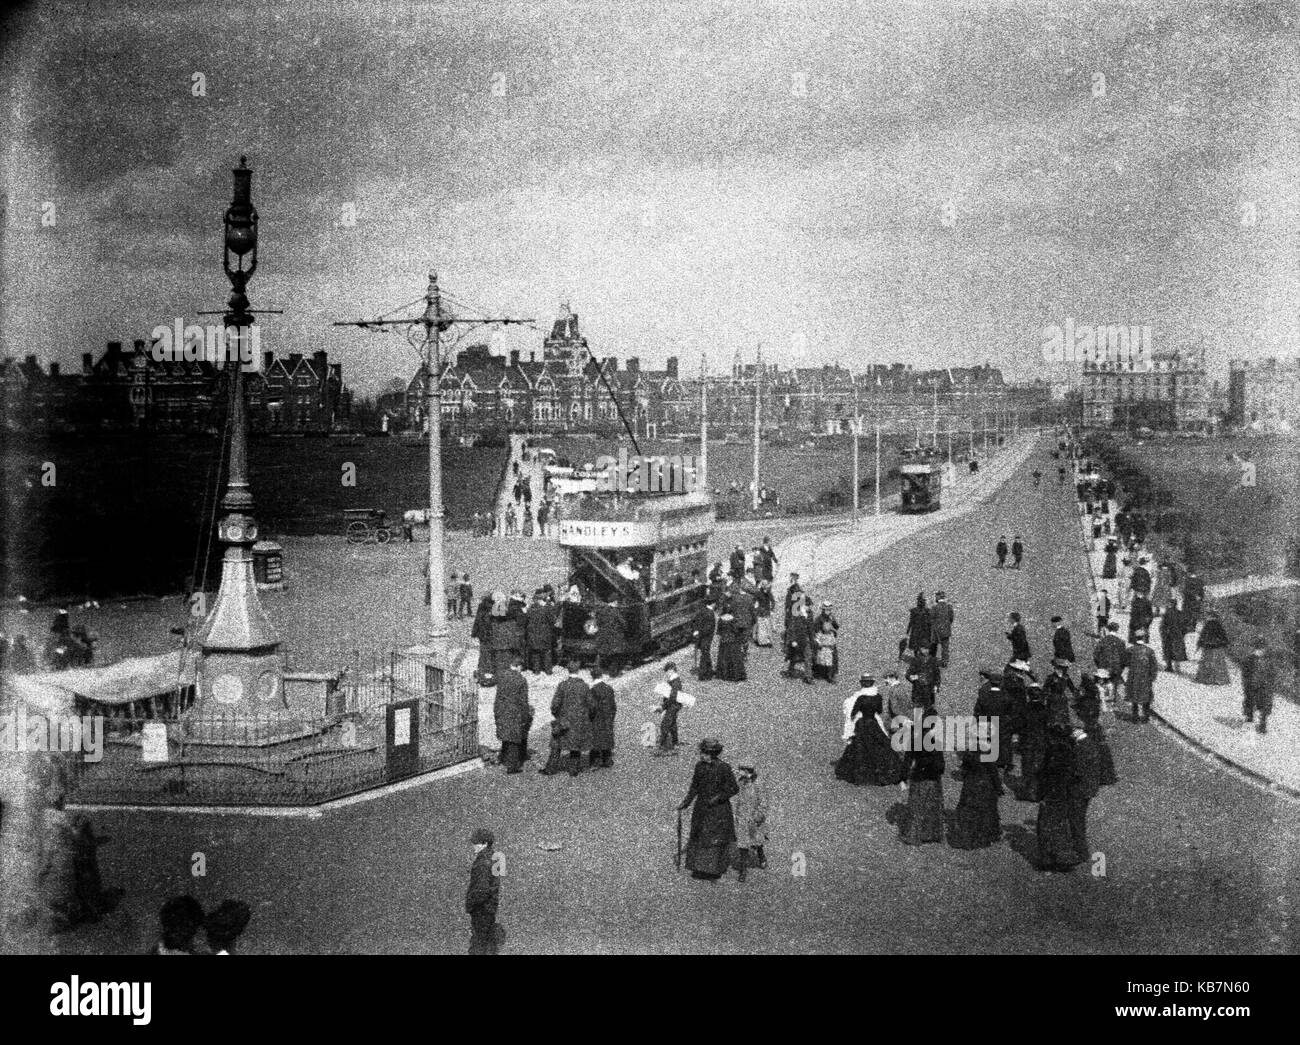 AJAXNETPHOTO. 1903. SOUTHSEA, ENGLAND. - VIEW FROM CLARENCE PIER LOOKING NORTH, SOUTHSEA COMMON ON THE RIGHT. PORTSMOUTH CORPORATION TRAM AT LEFT HAS NAMEBOARD DESTINATION FOR COSHAM. PHOTOGRAPHER:UNKNOWN © DIGITAL IMAGE COPYRIGHT AJAX VINTAGE PICTURE LIBRARY SOURCE: AJAX VINTAGE PICTURE LIBRARY COLLECTION REF:AVL 0473 Stock Photo